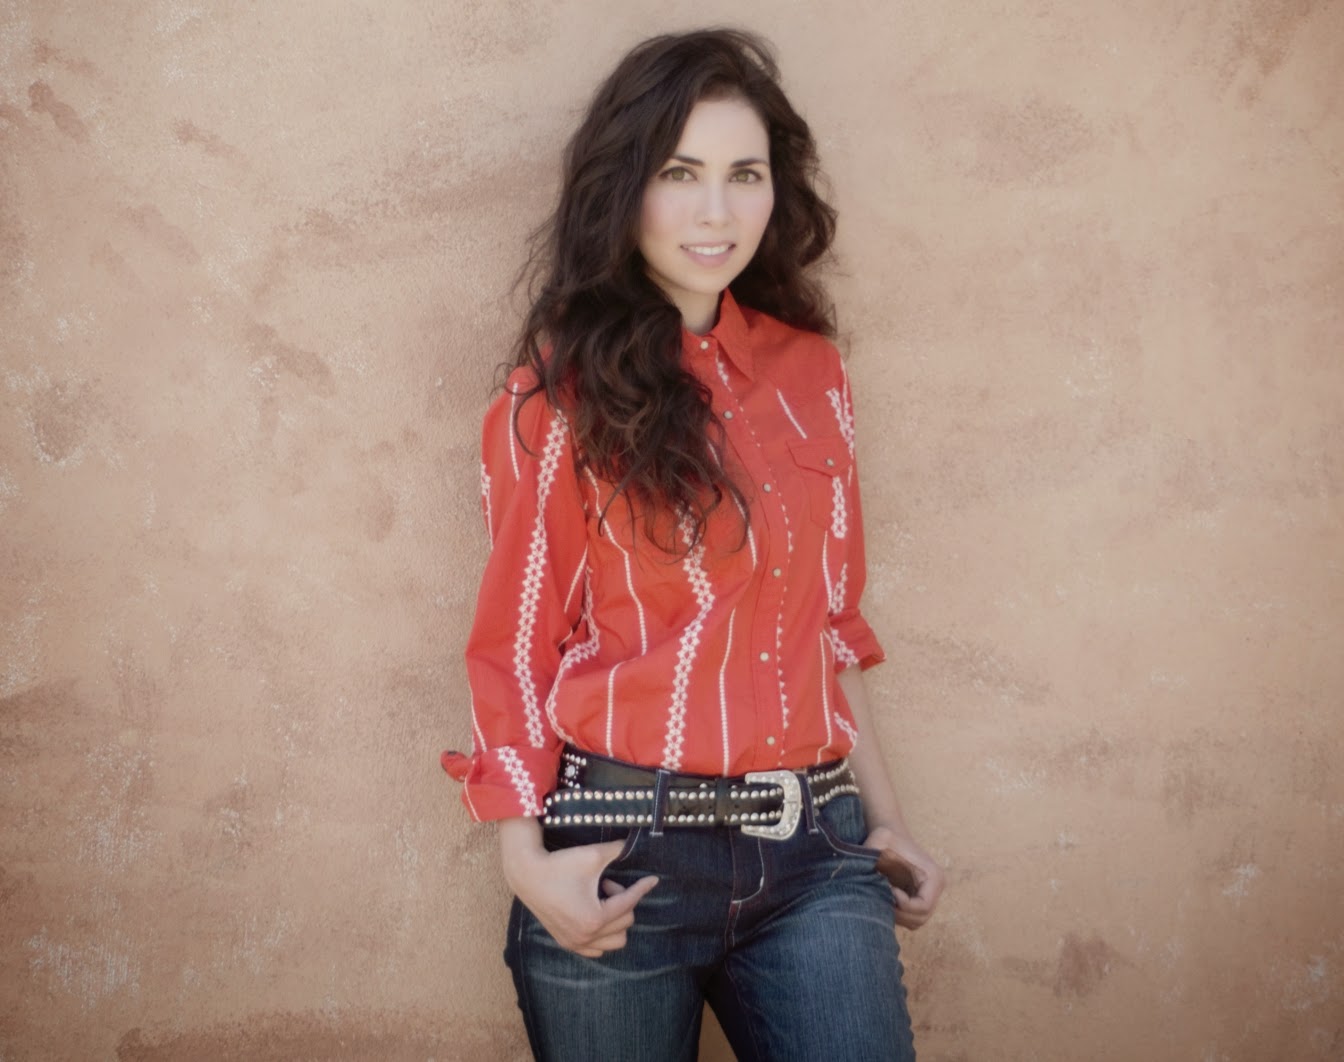 Country Style with Ana Karen Loera